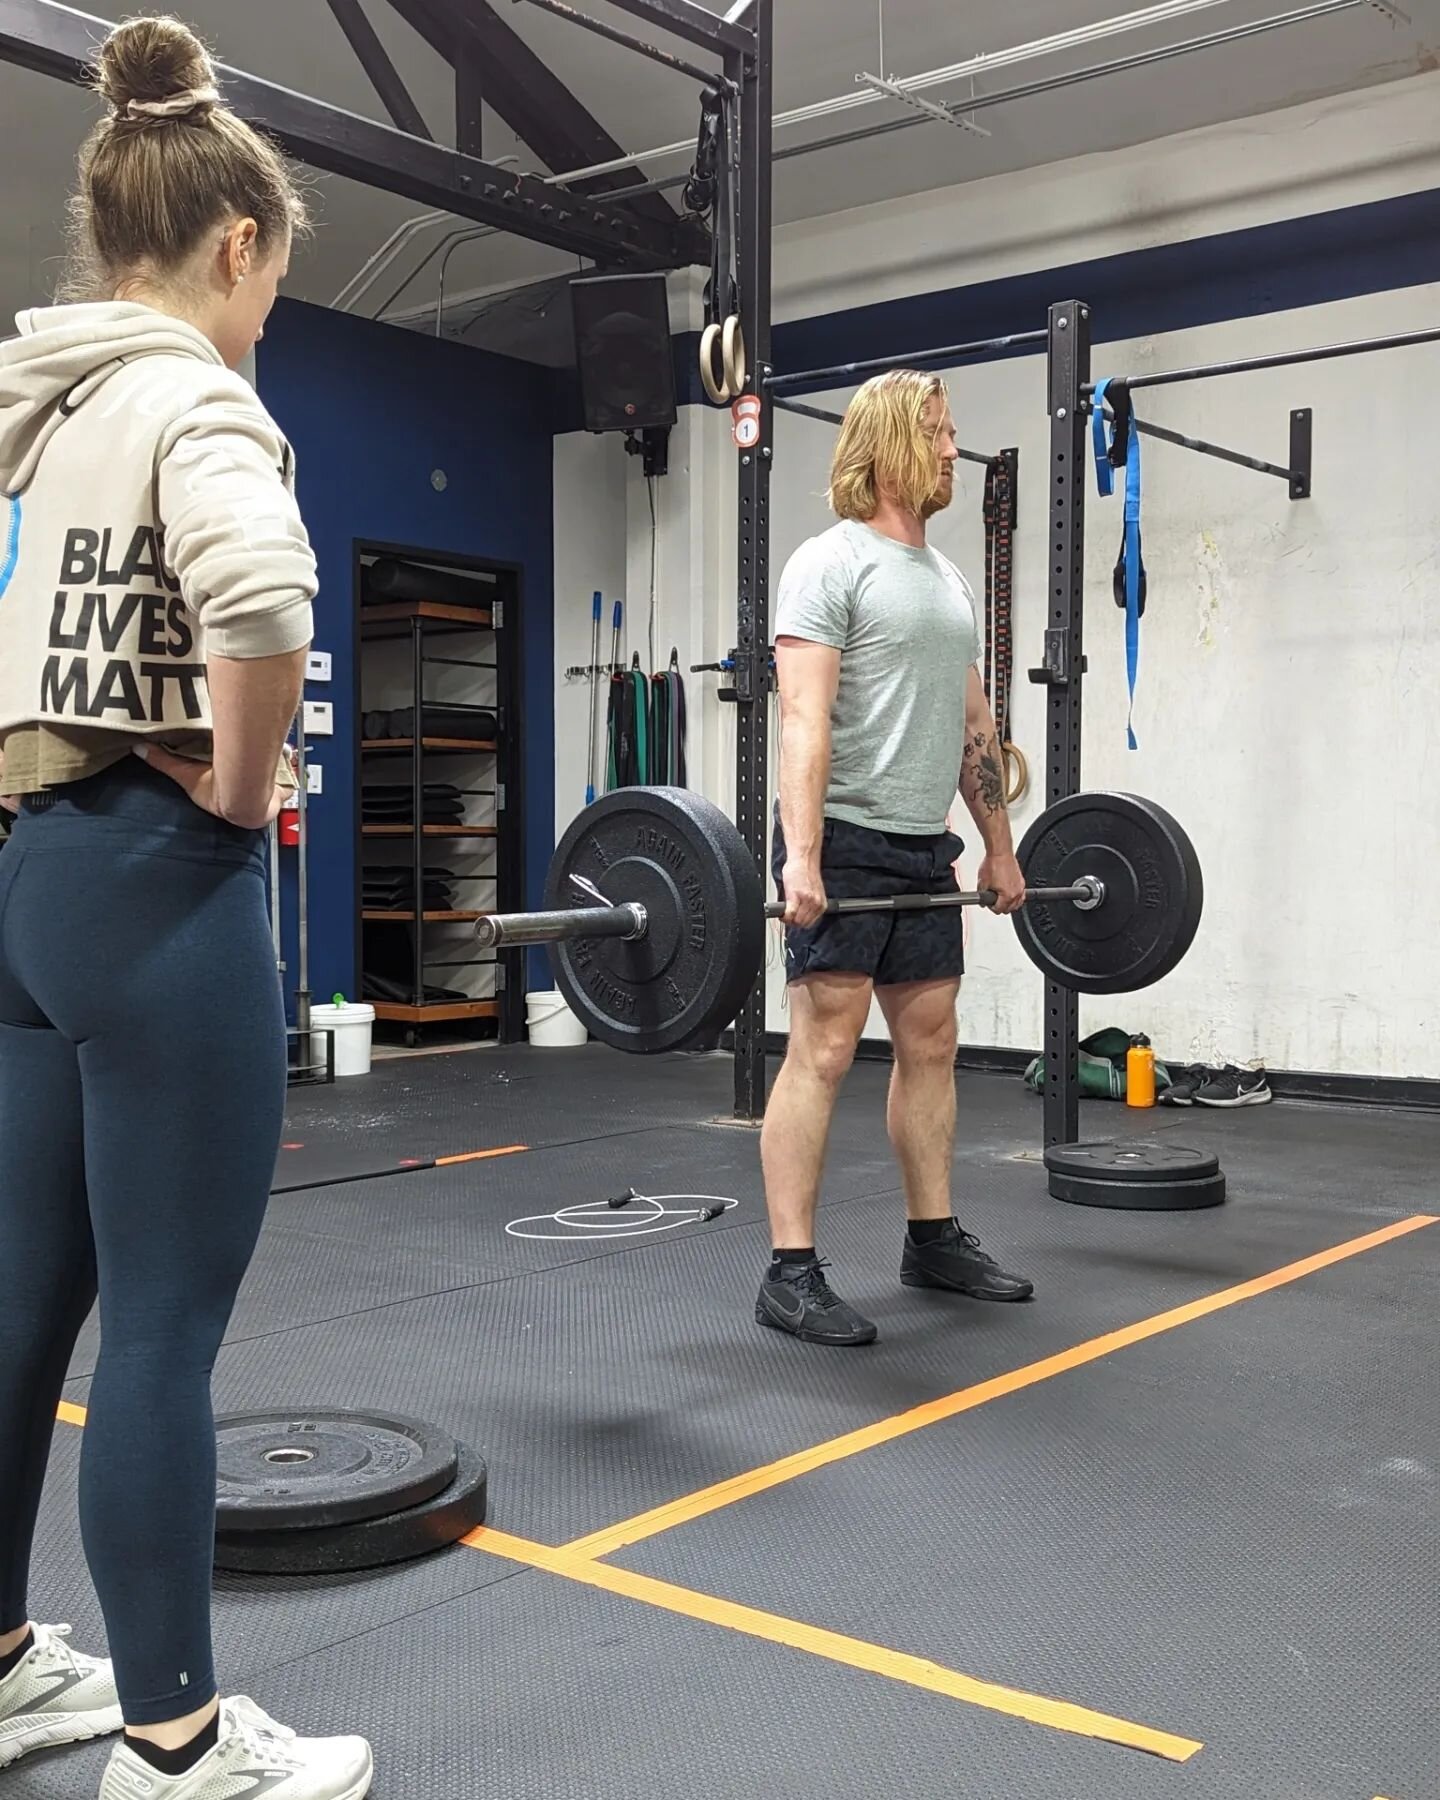 Coach sees all (and is really proud of how much everyone improved their deadlifts over this past circuit) 💪